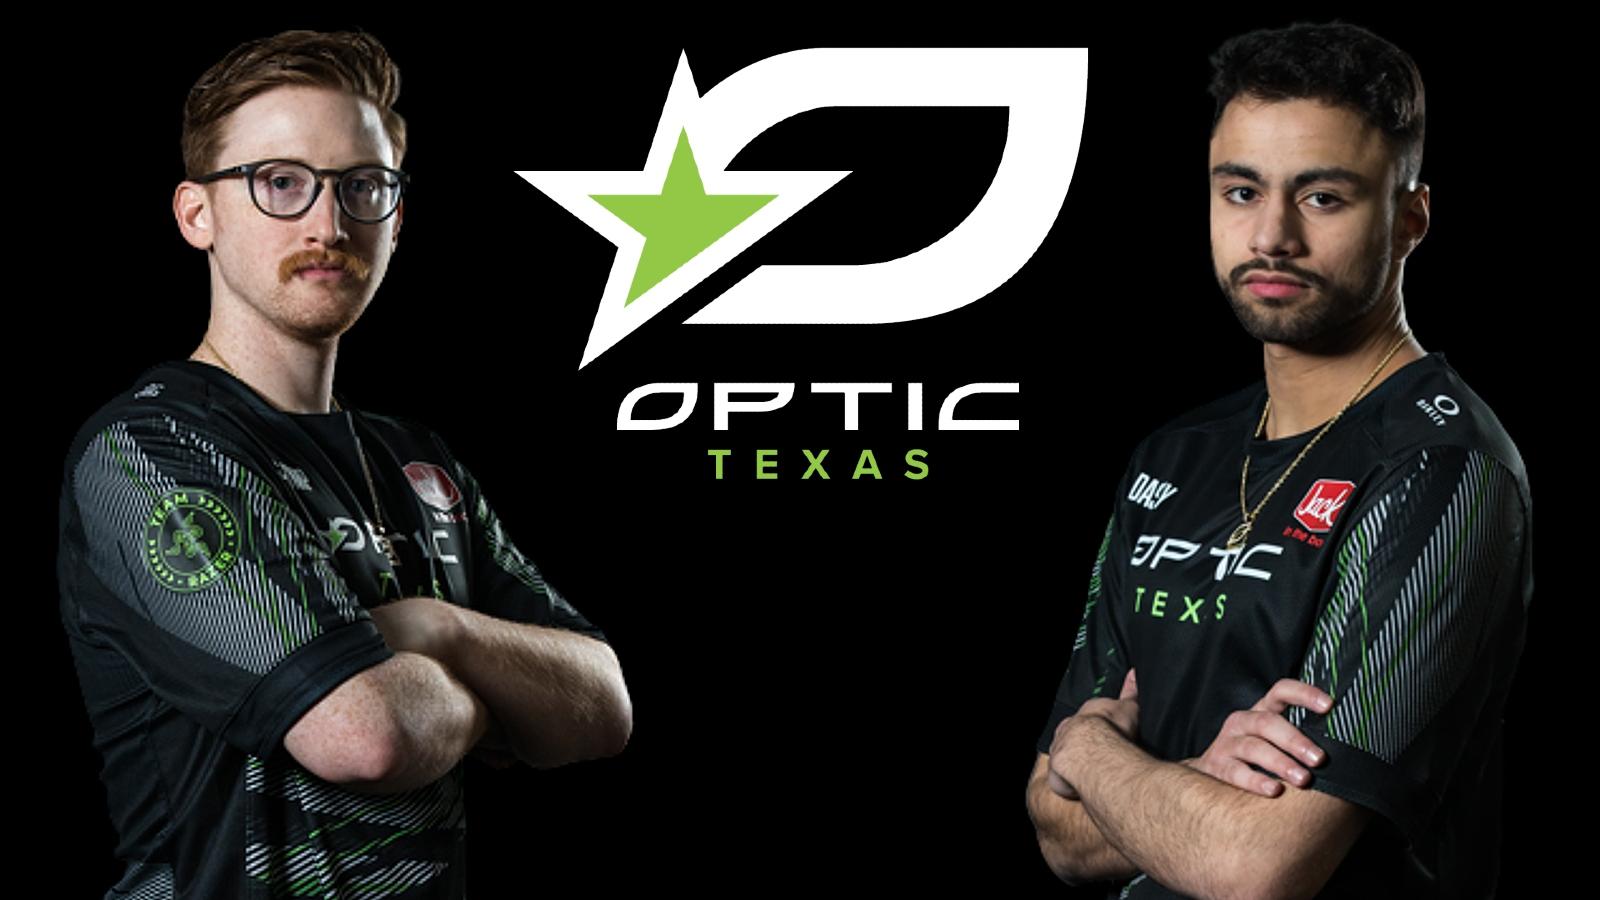 OPTIC DROP GHOSTY AND HUKE: Who are they targeting??